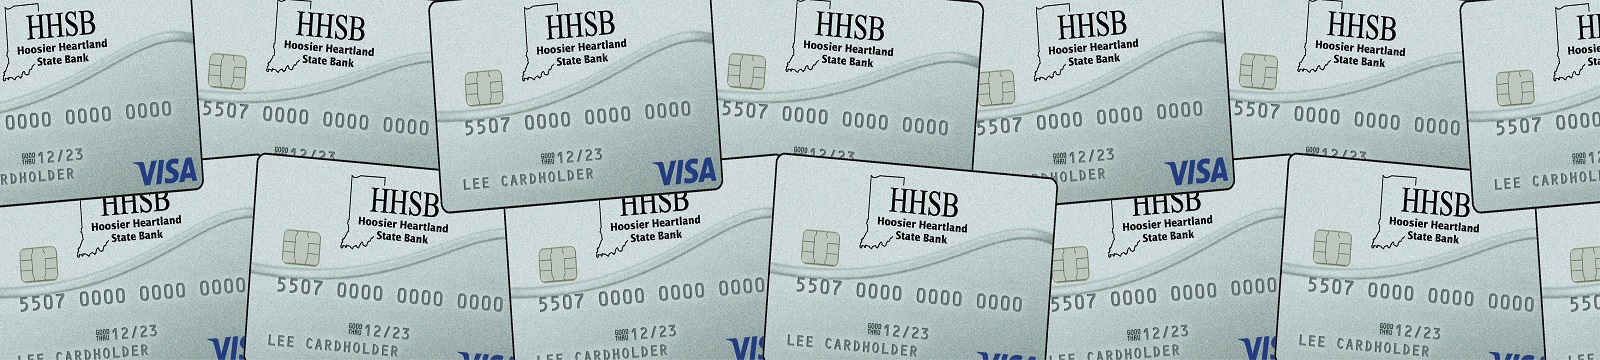 HHSB credit card collage